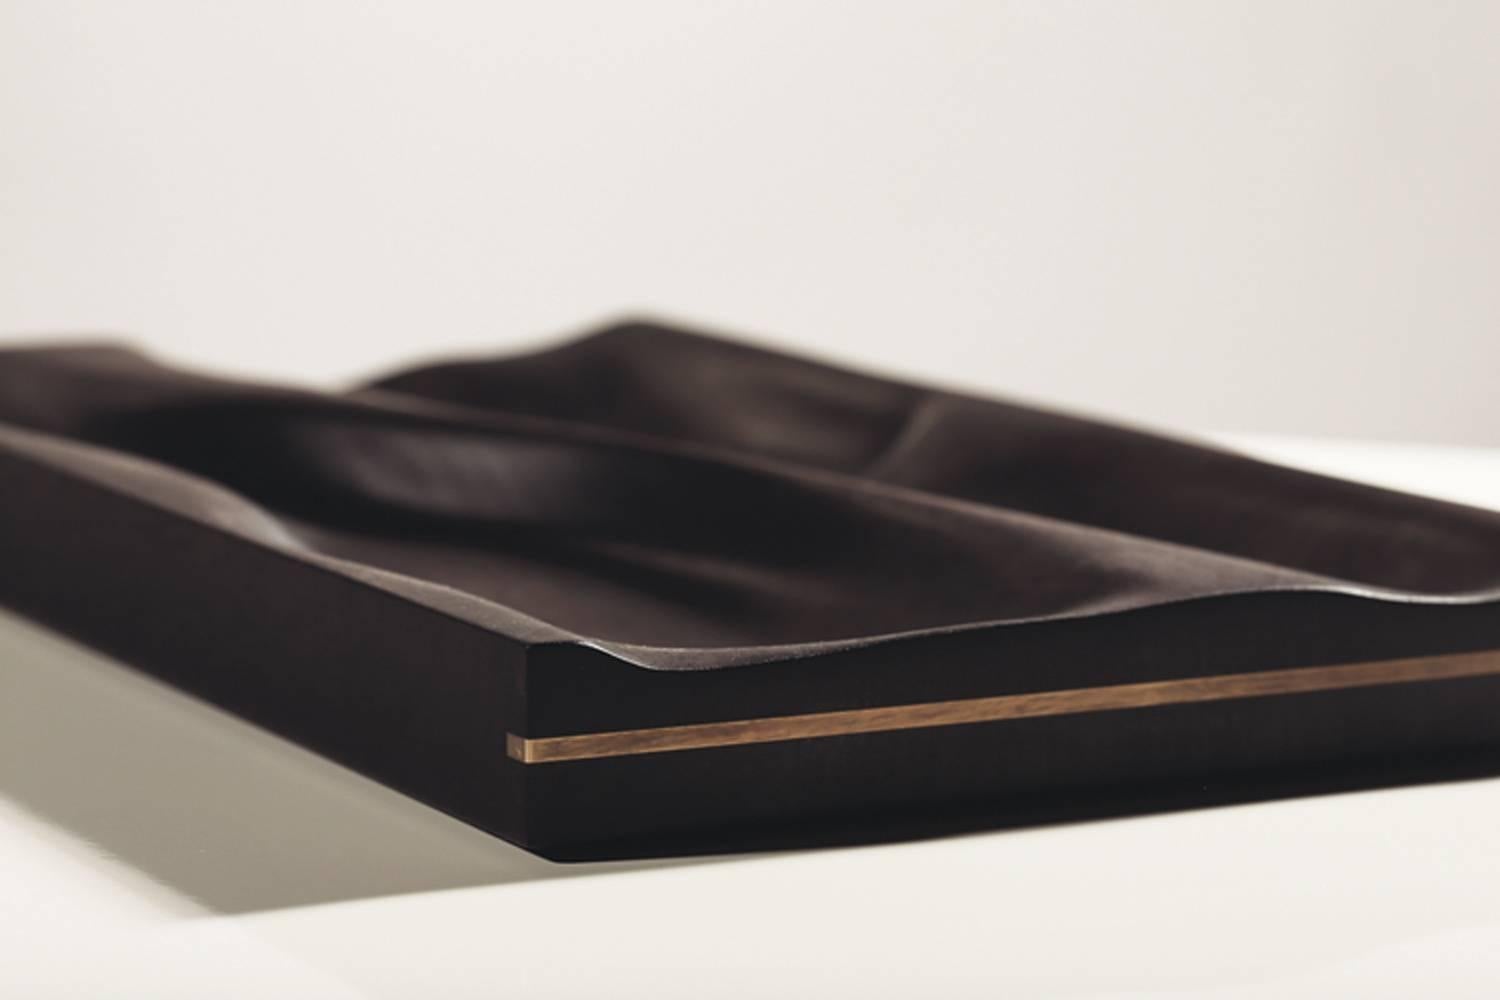 Contemporary ebonized tray by Vincent Pocsik

Carved walnut tray with ebonized finish.

Natural food safe oil and wax finish.

Vincent Pocsik finds the balance between old and new fabrication techniques working in conjunction to find an anatomical